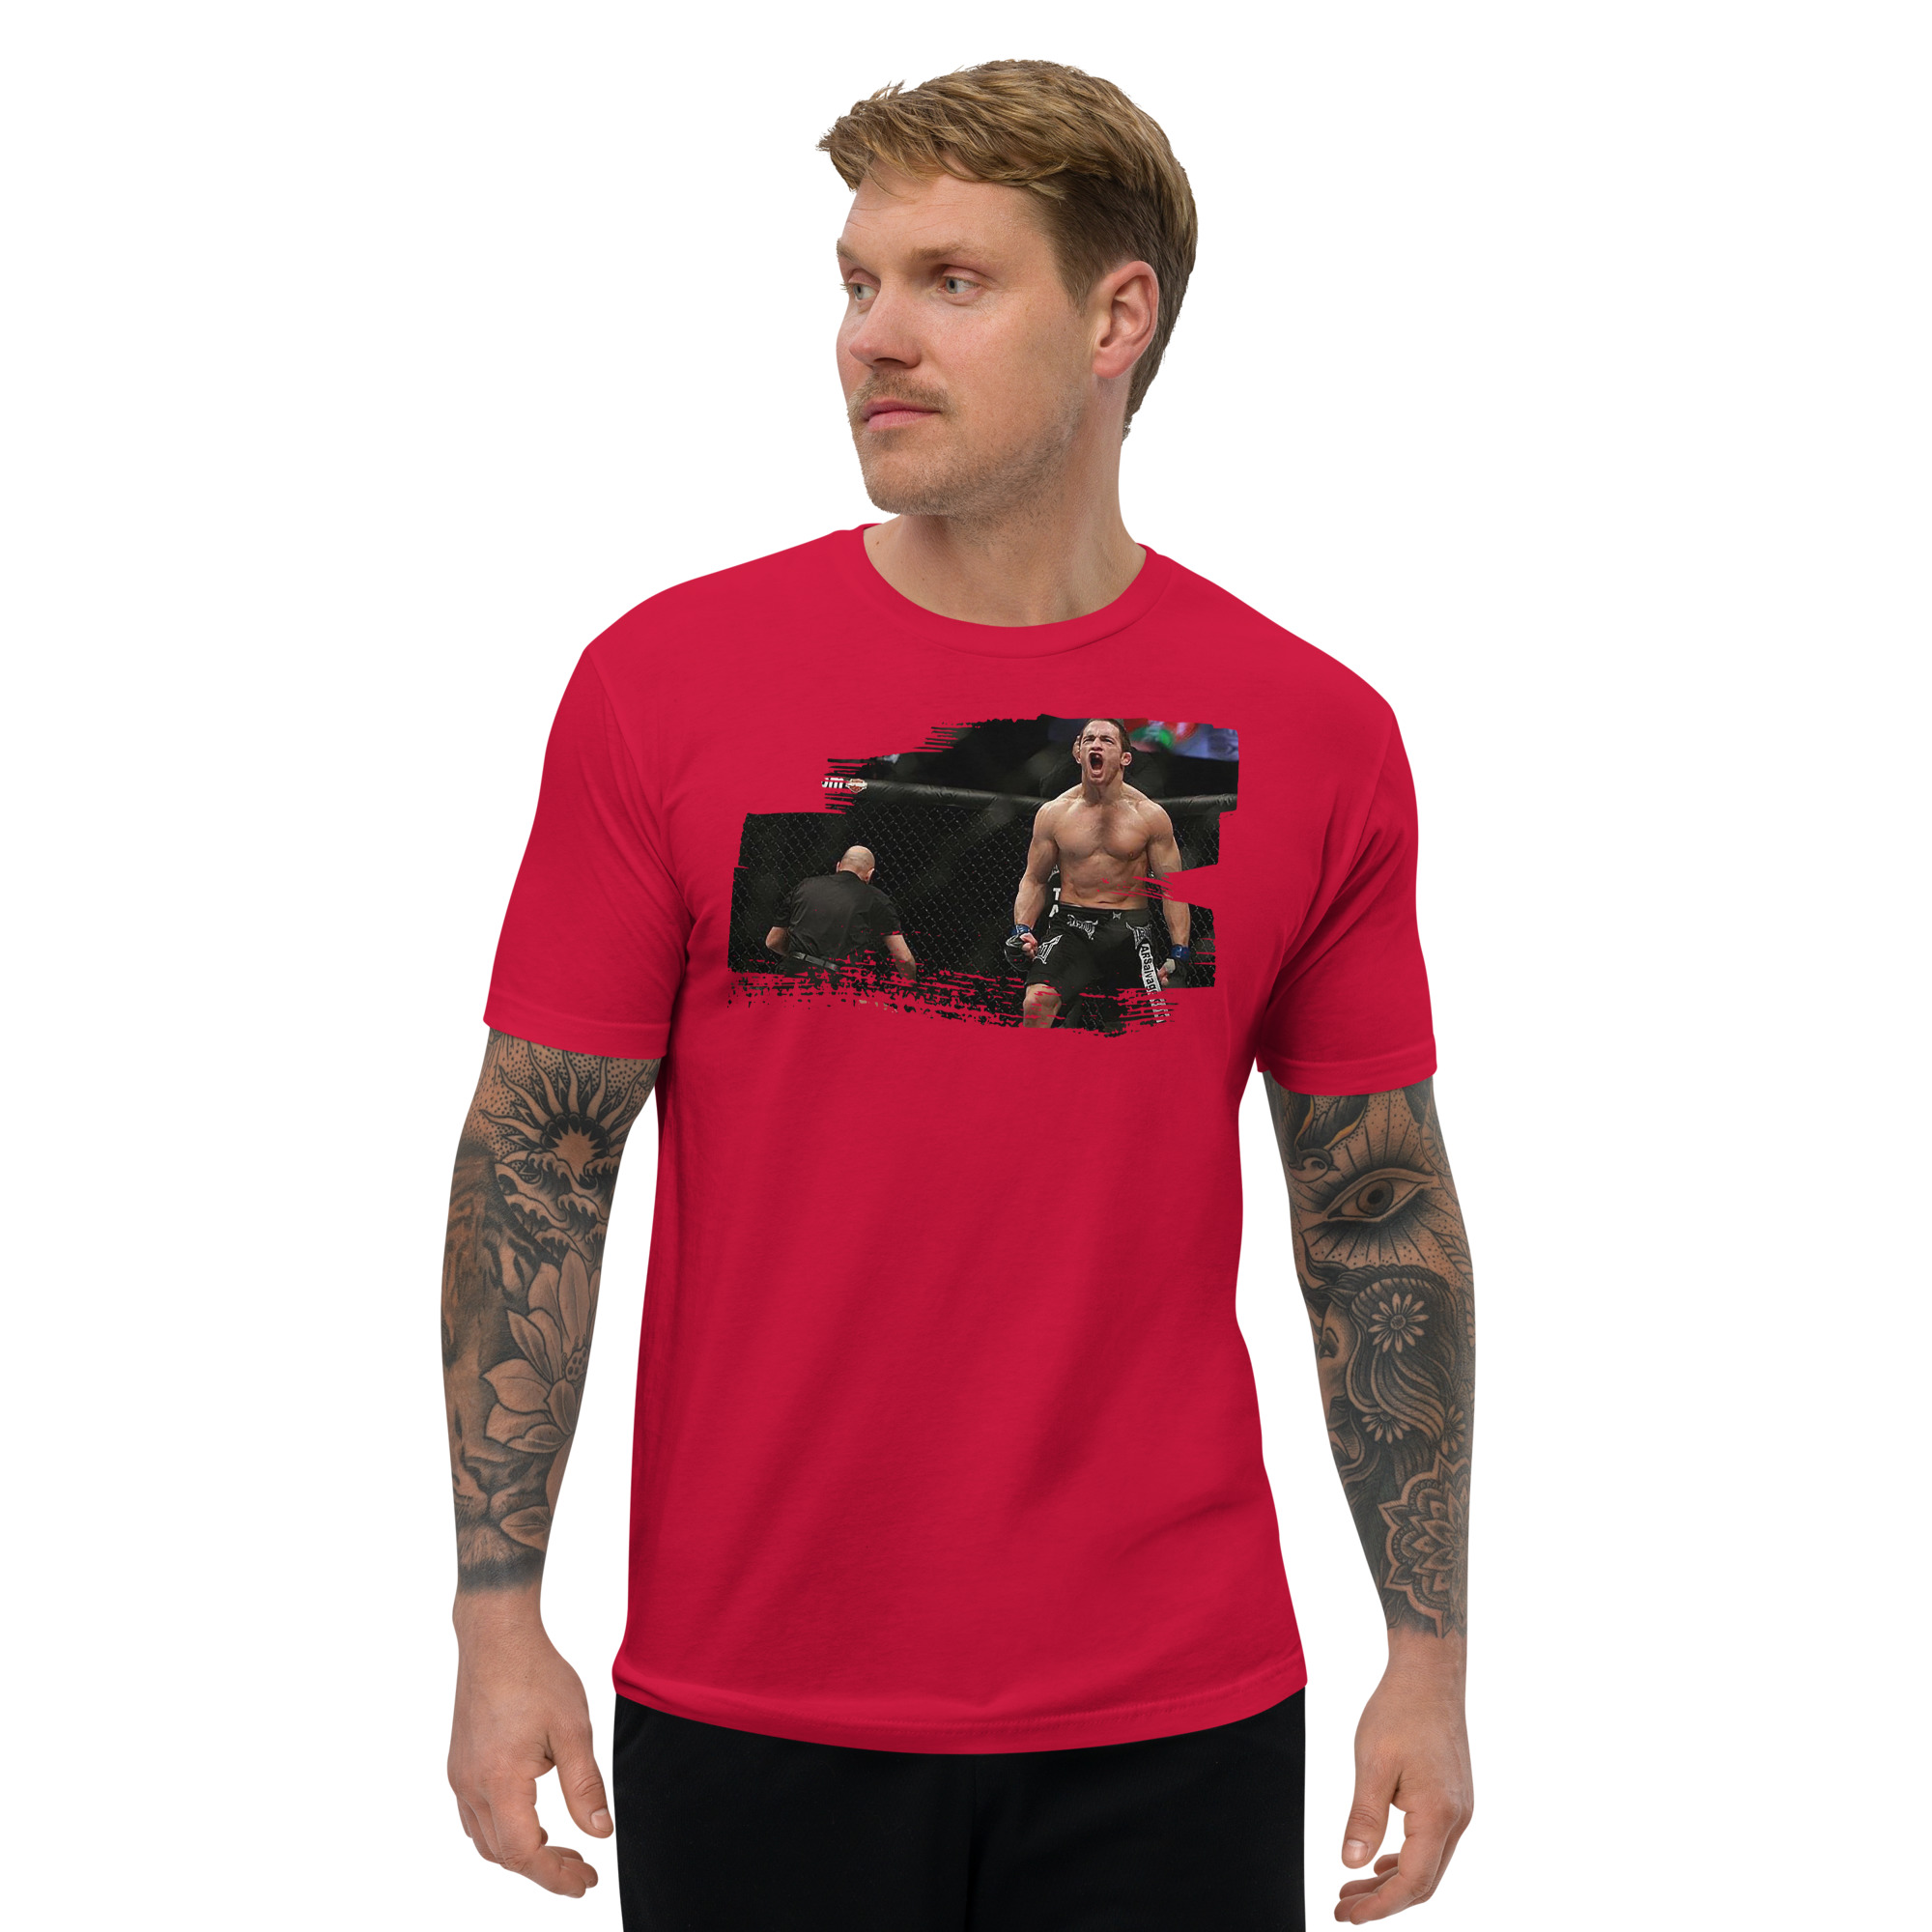 mens-fitted-t-shirt-red-front-63ddc8a2781d4.jpg